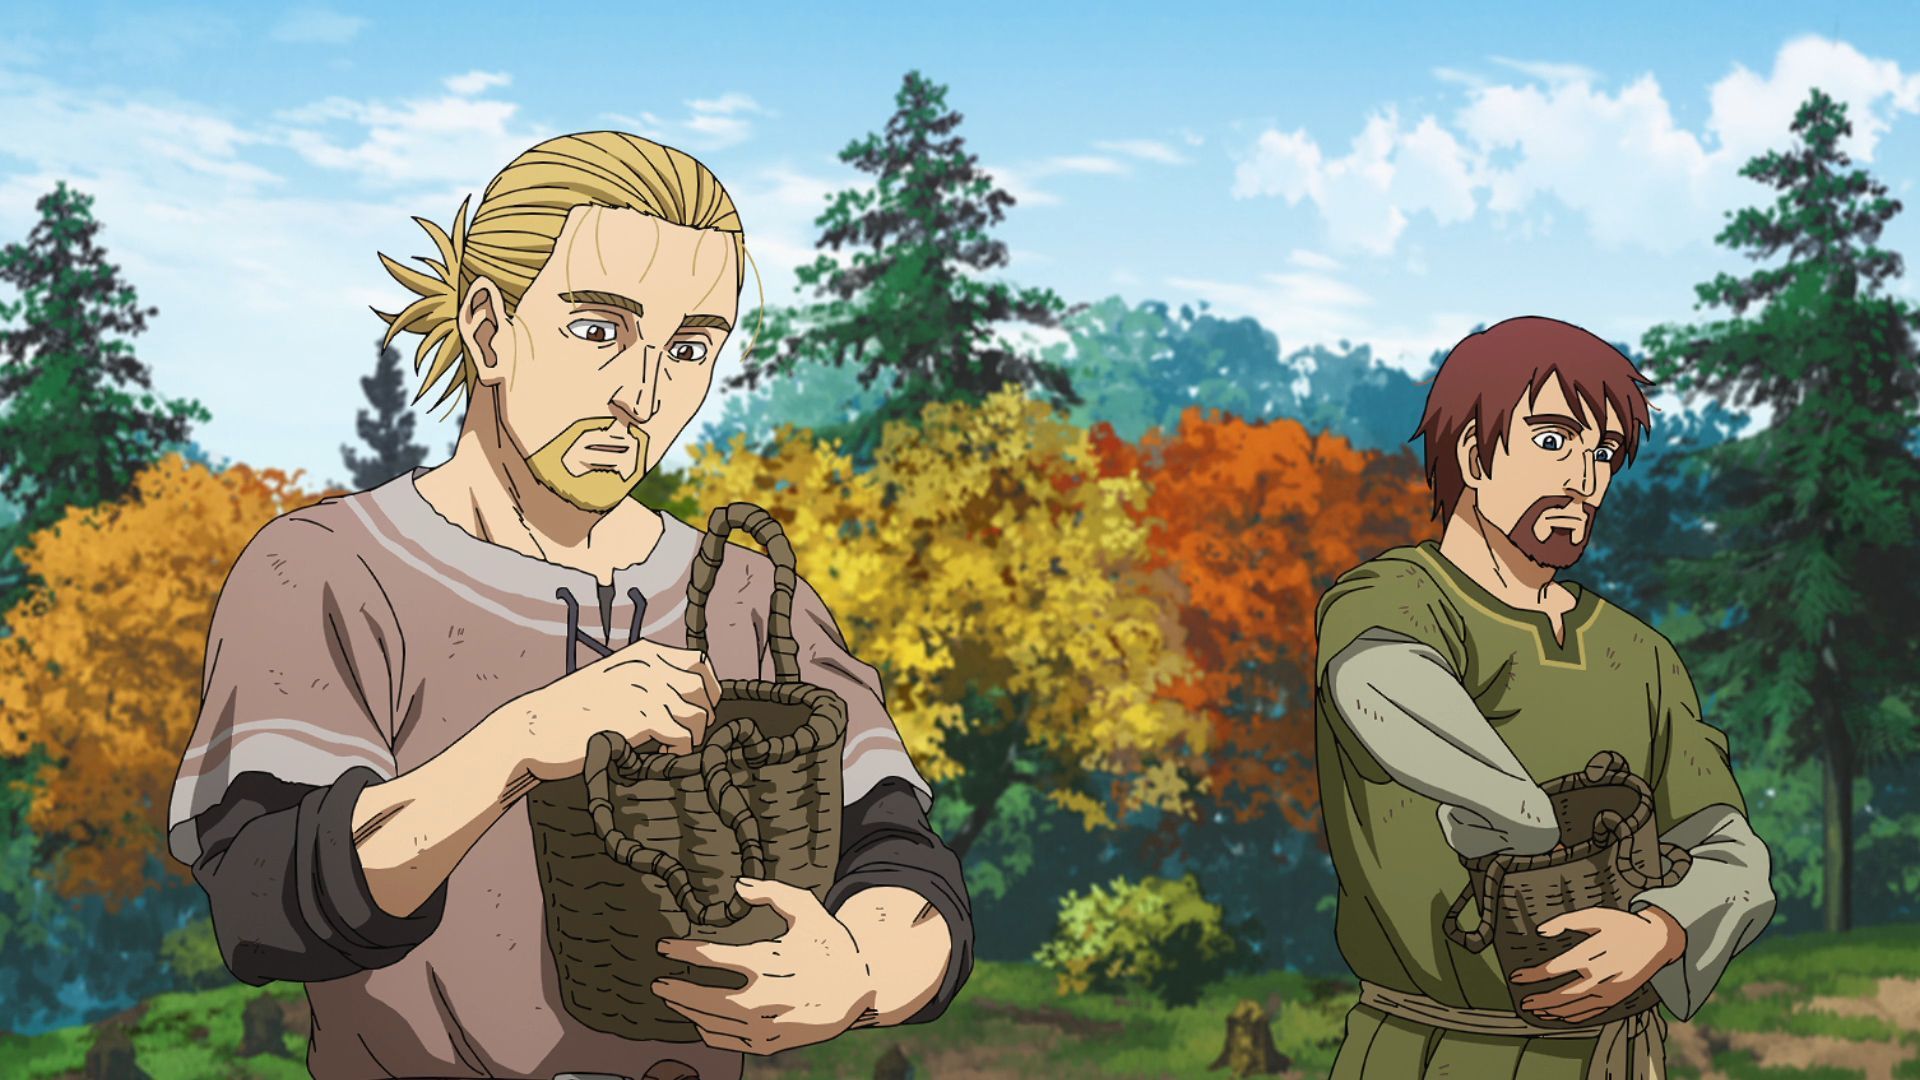 Vinland Saga Season 2 Episode 16 Release Date, Time, Spoilers, Preview, Watch Online, and More